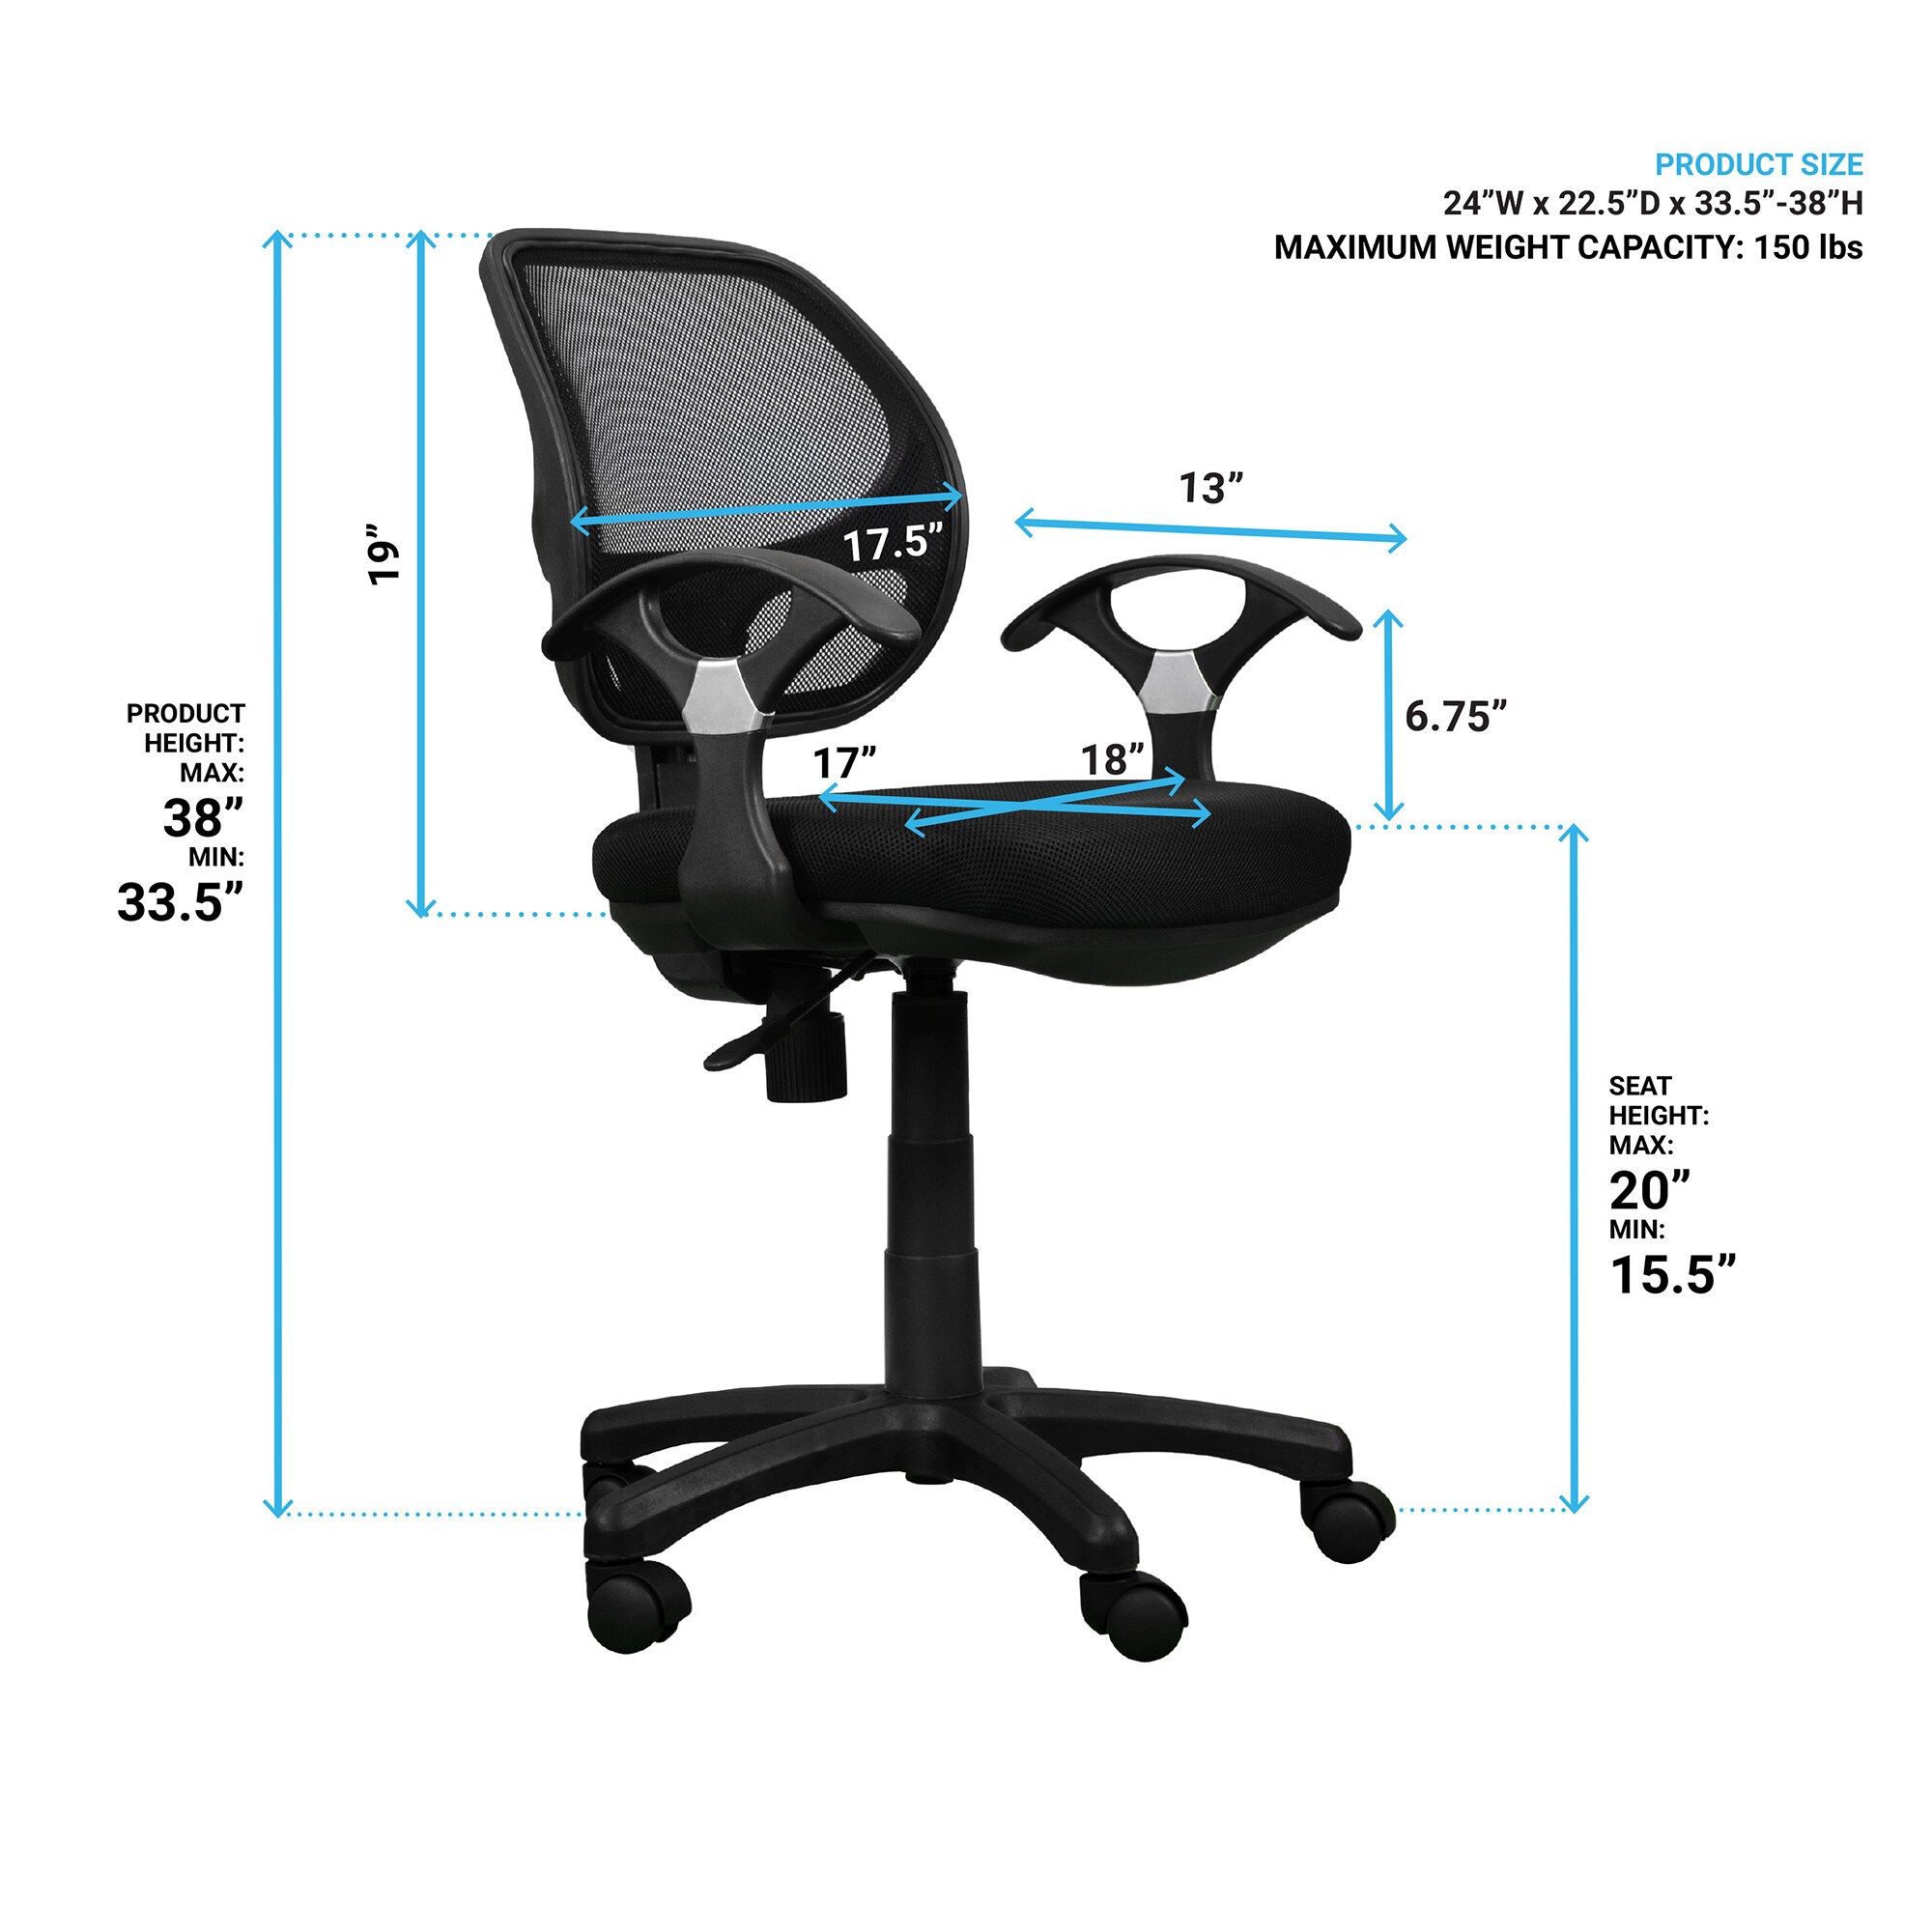 Blue Gaming Chair with Breathable Fabric, Pocket Spring Cushion, and Gel Pad